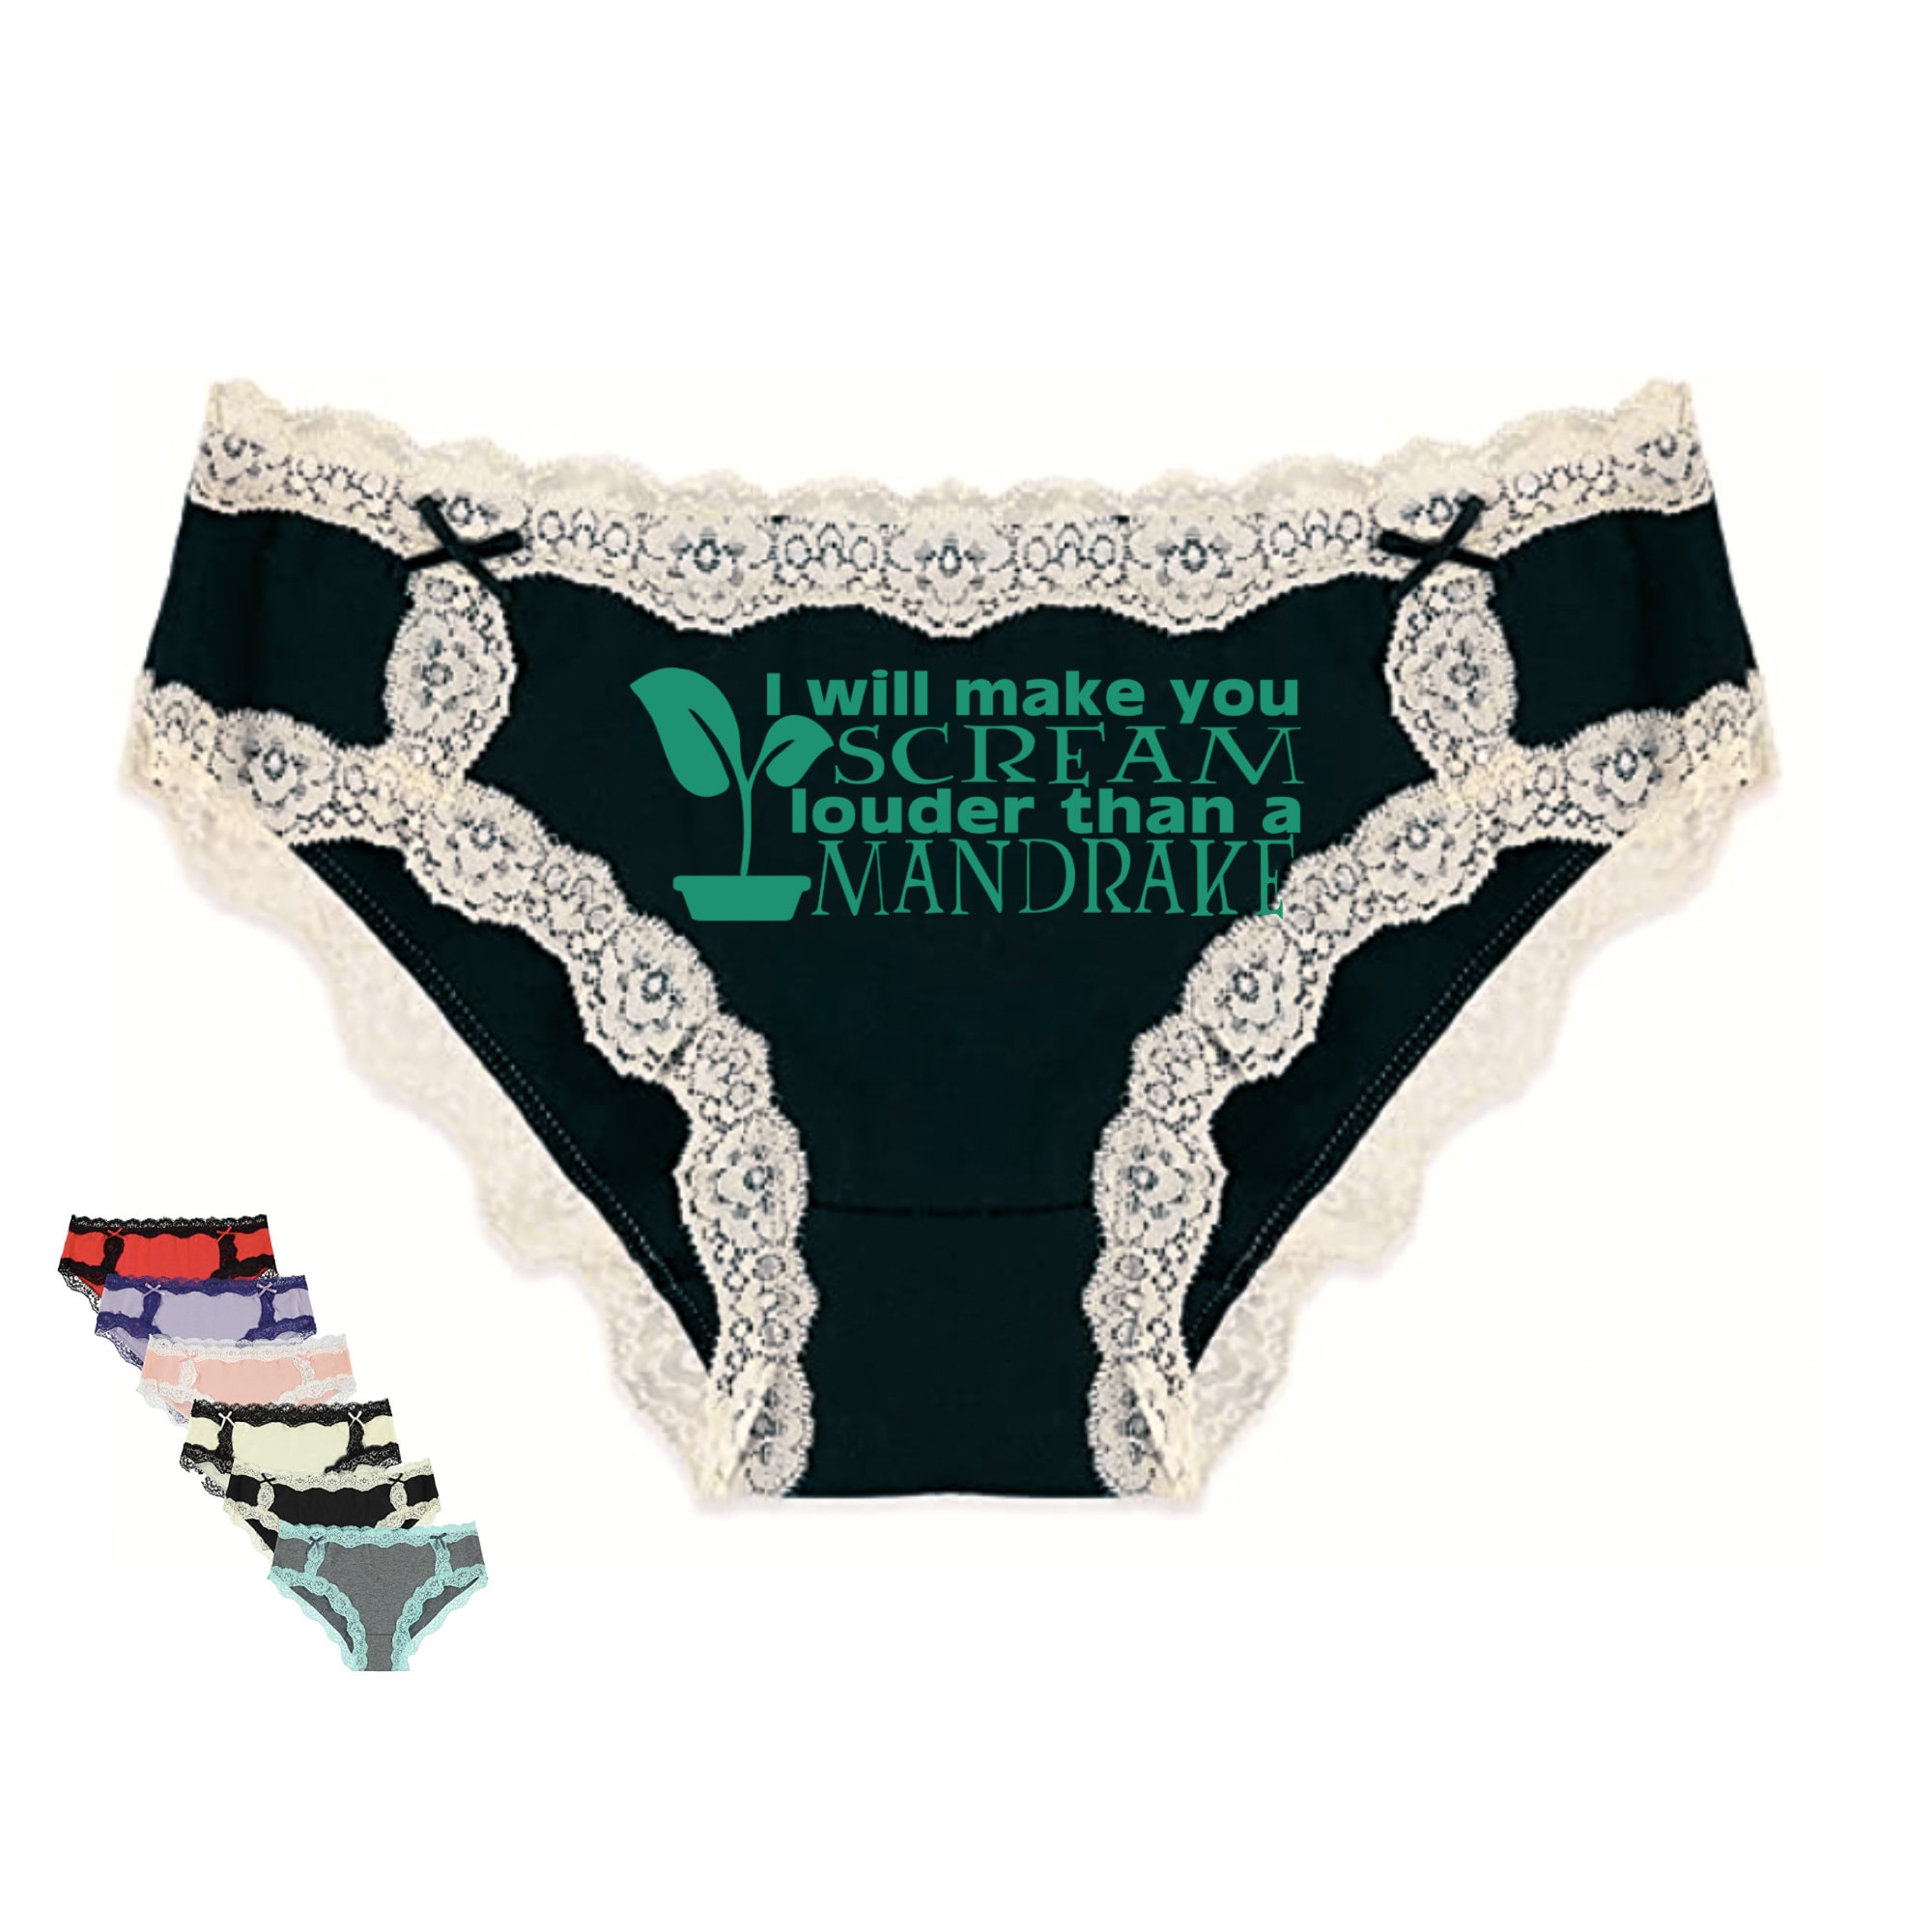 Chamber of Secrets Panties, Wizard String, Thong, Hipster, Boy